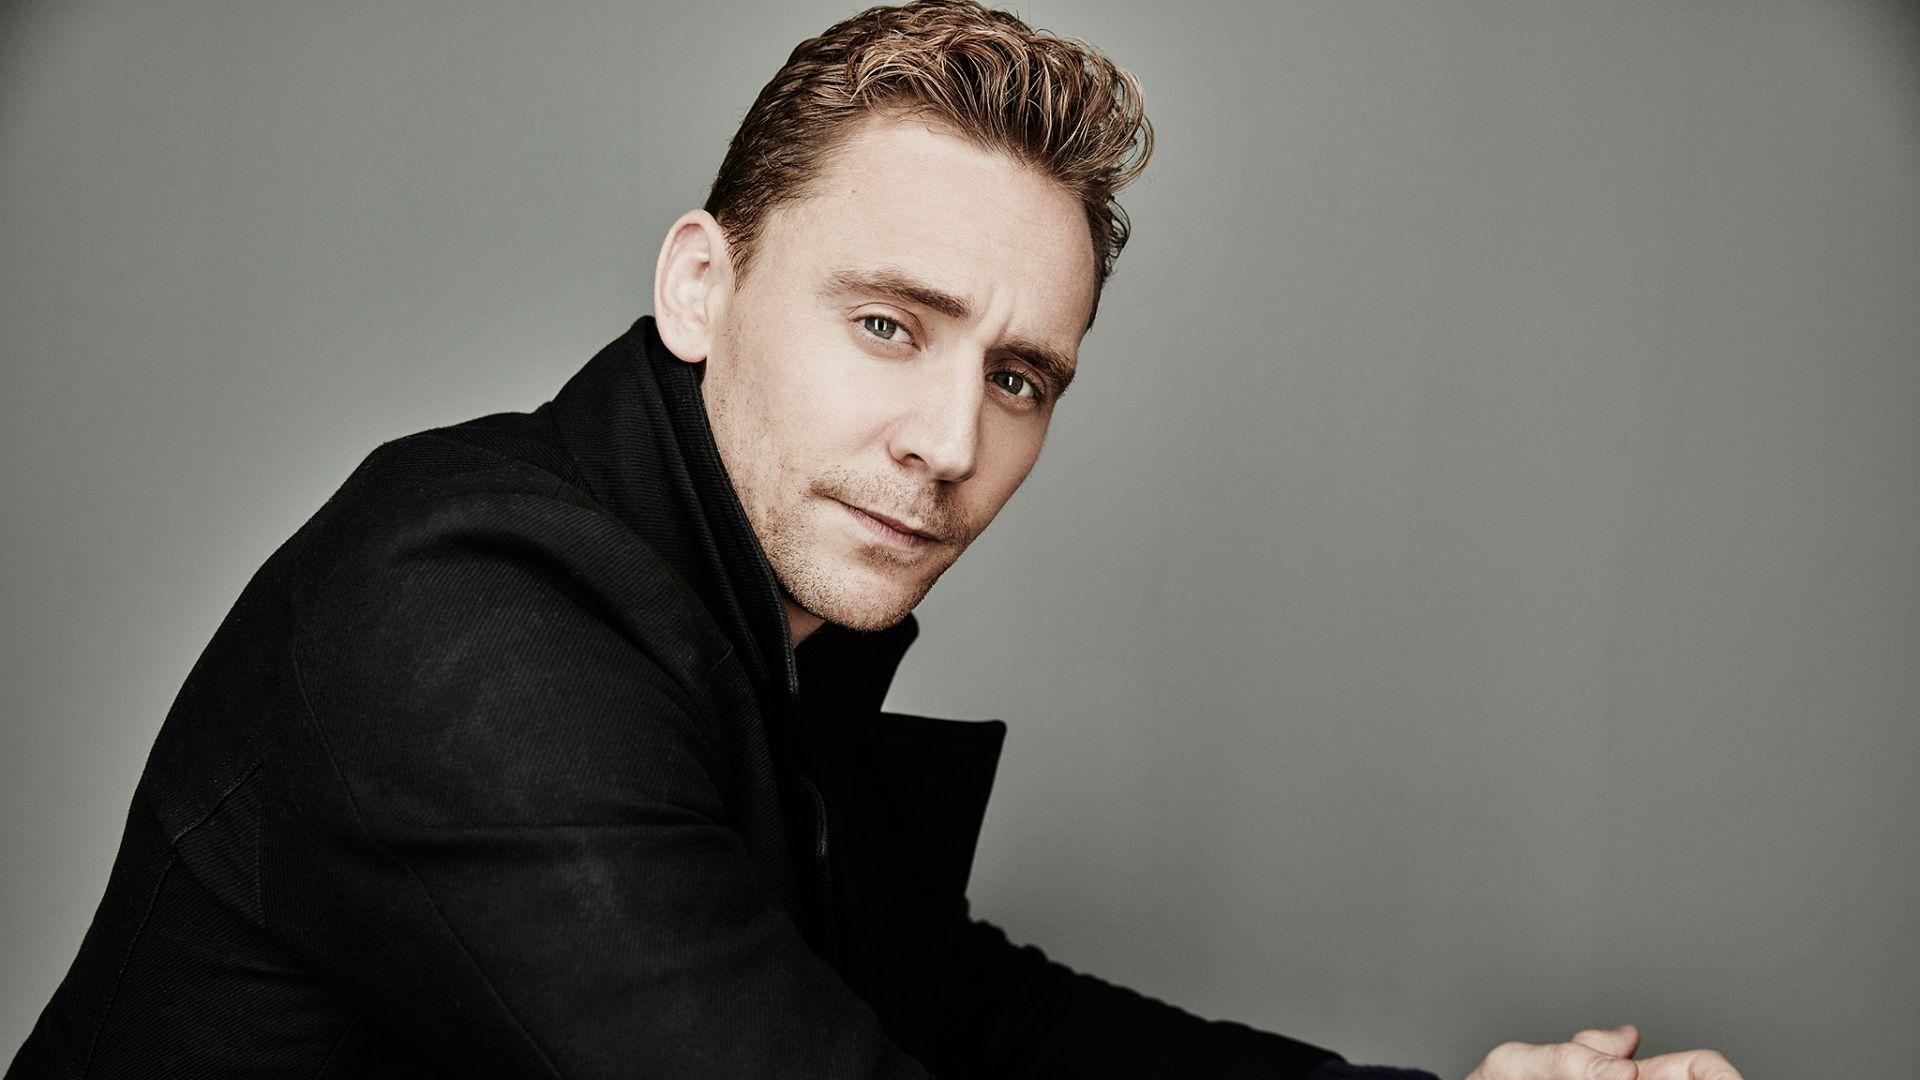 Tom Hiddleston Wallpaper High Resolution and Quality Download